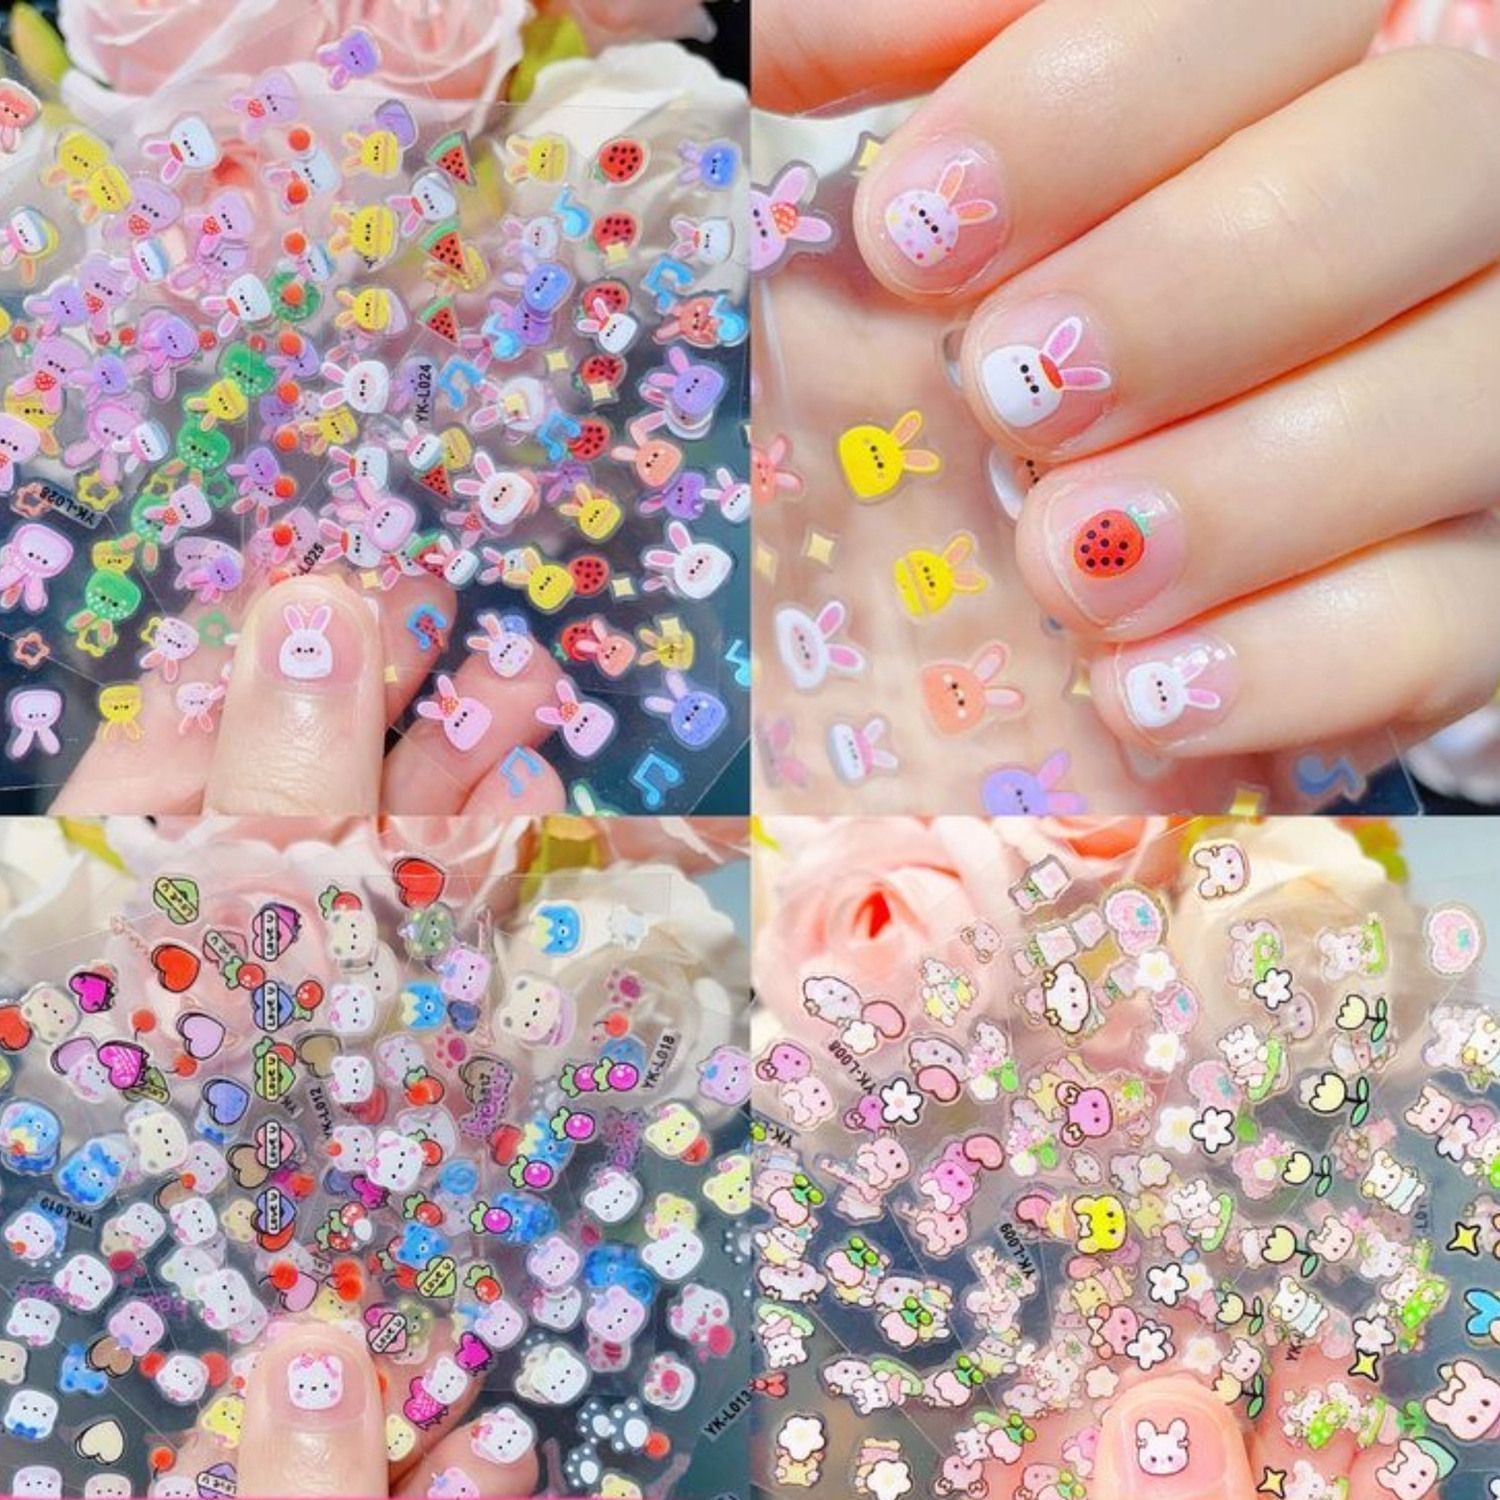 Children's Cute Cartoon Nail Stickers Princess Baby Waterproof Nail Art Decals Kids Toy Bunny Nail Art Stickers